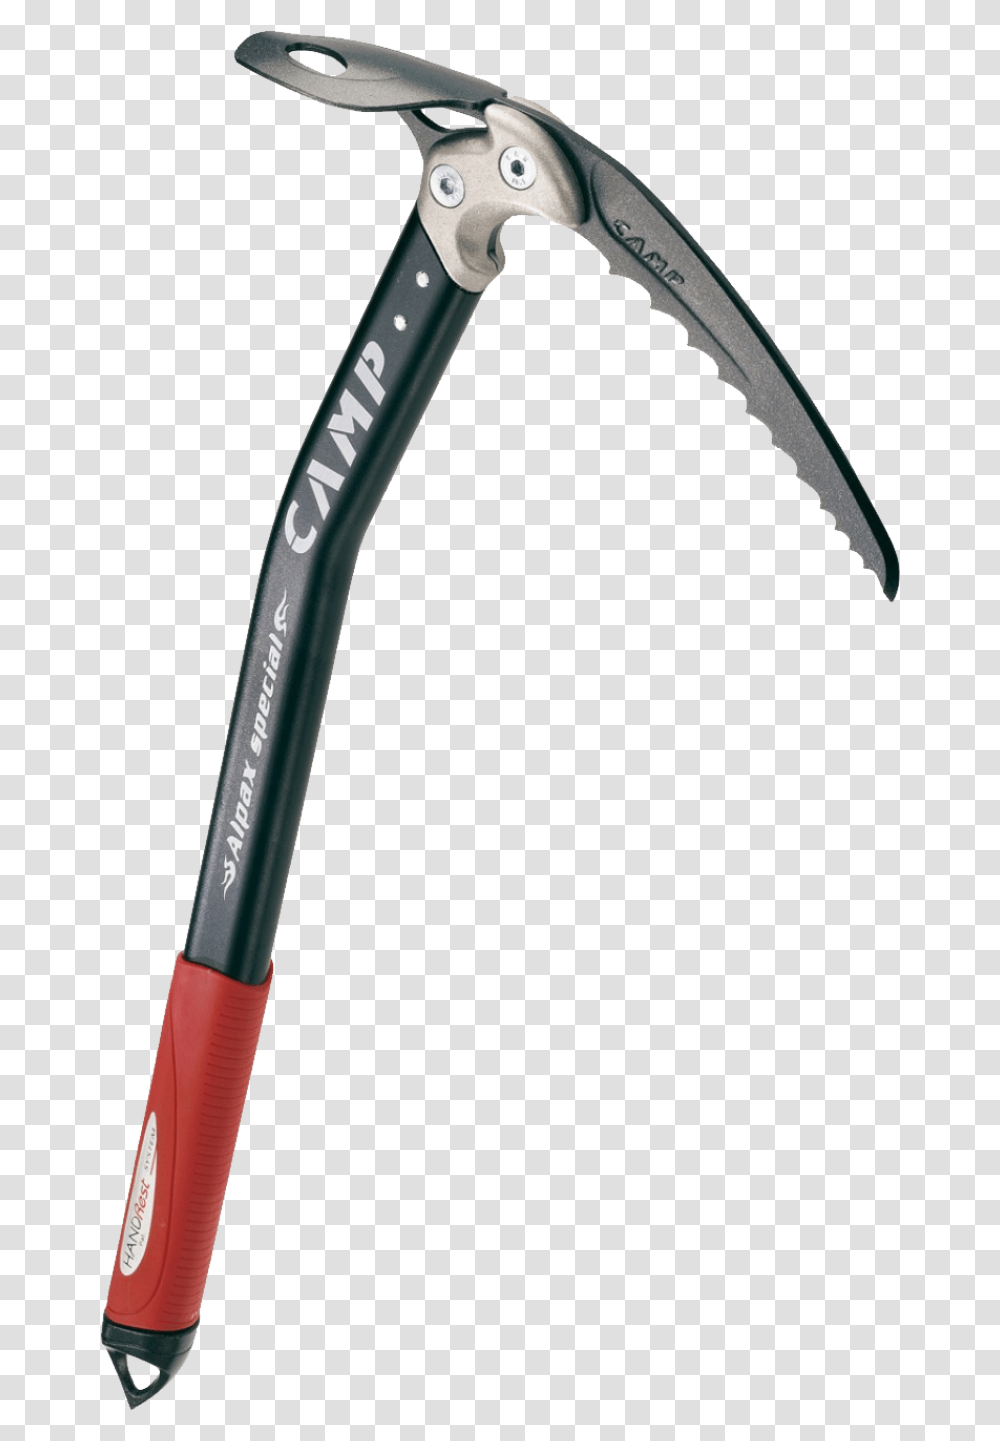 Grab And Download Ice Axe Image Without Background Ice Axe, Tool, Hammer, Brush Transparent Png